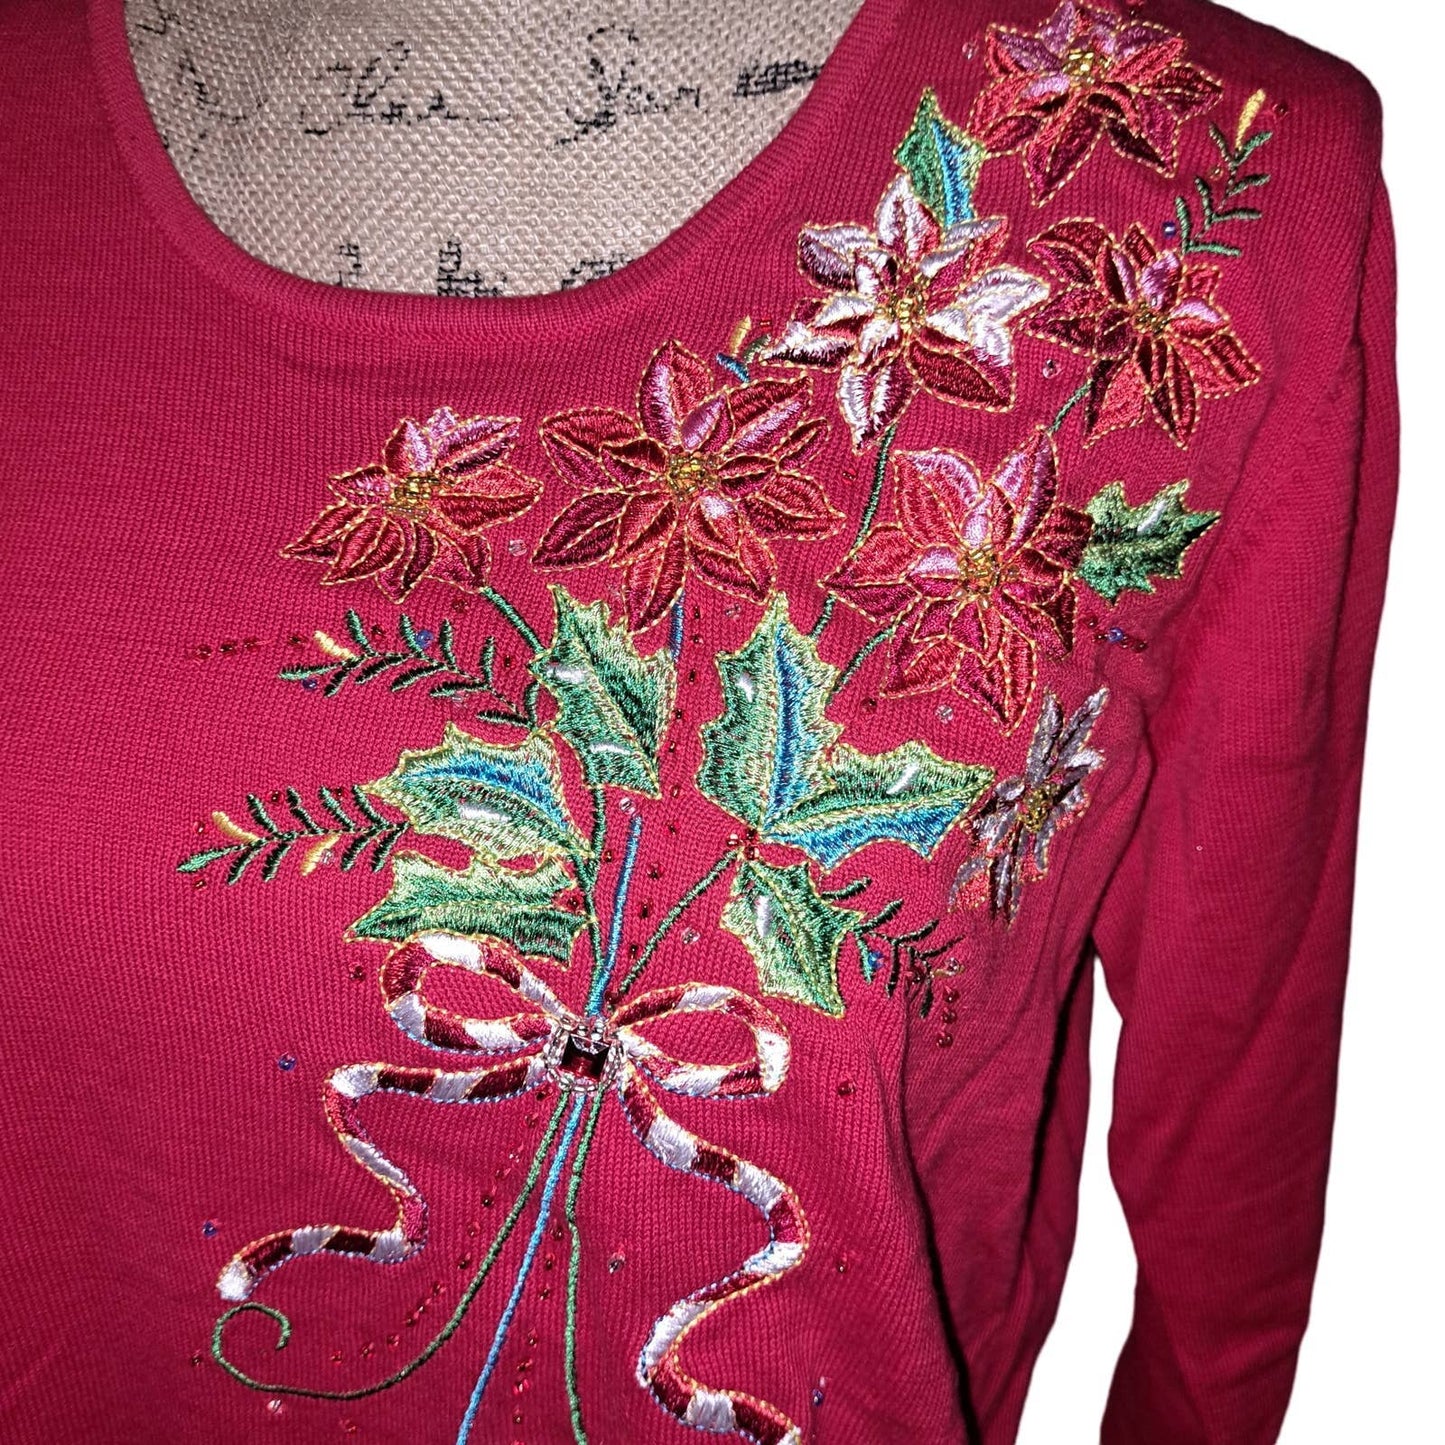 NWT-Quacker Factory Red Long Sleeve Poinsettia Bouquet Sweater Size: Med